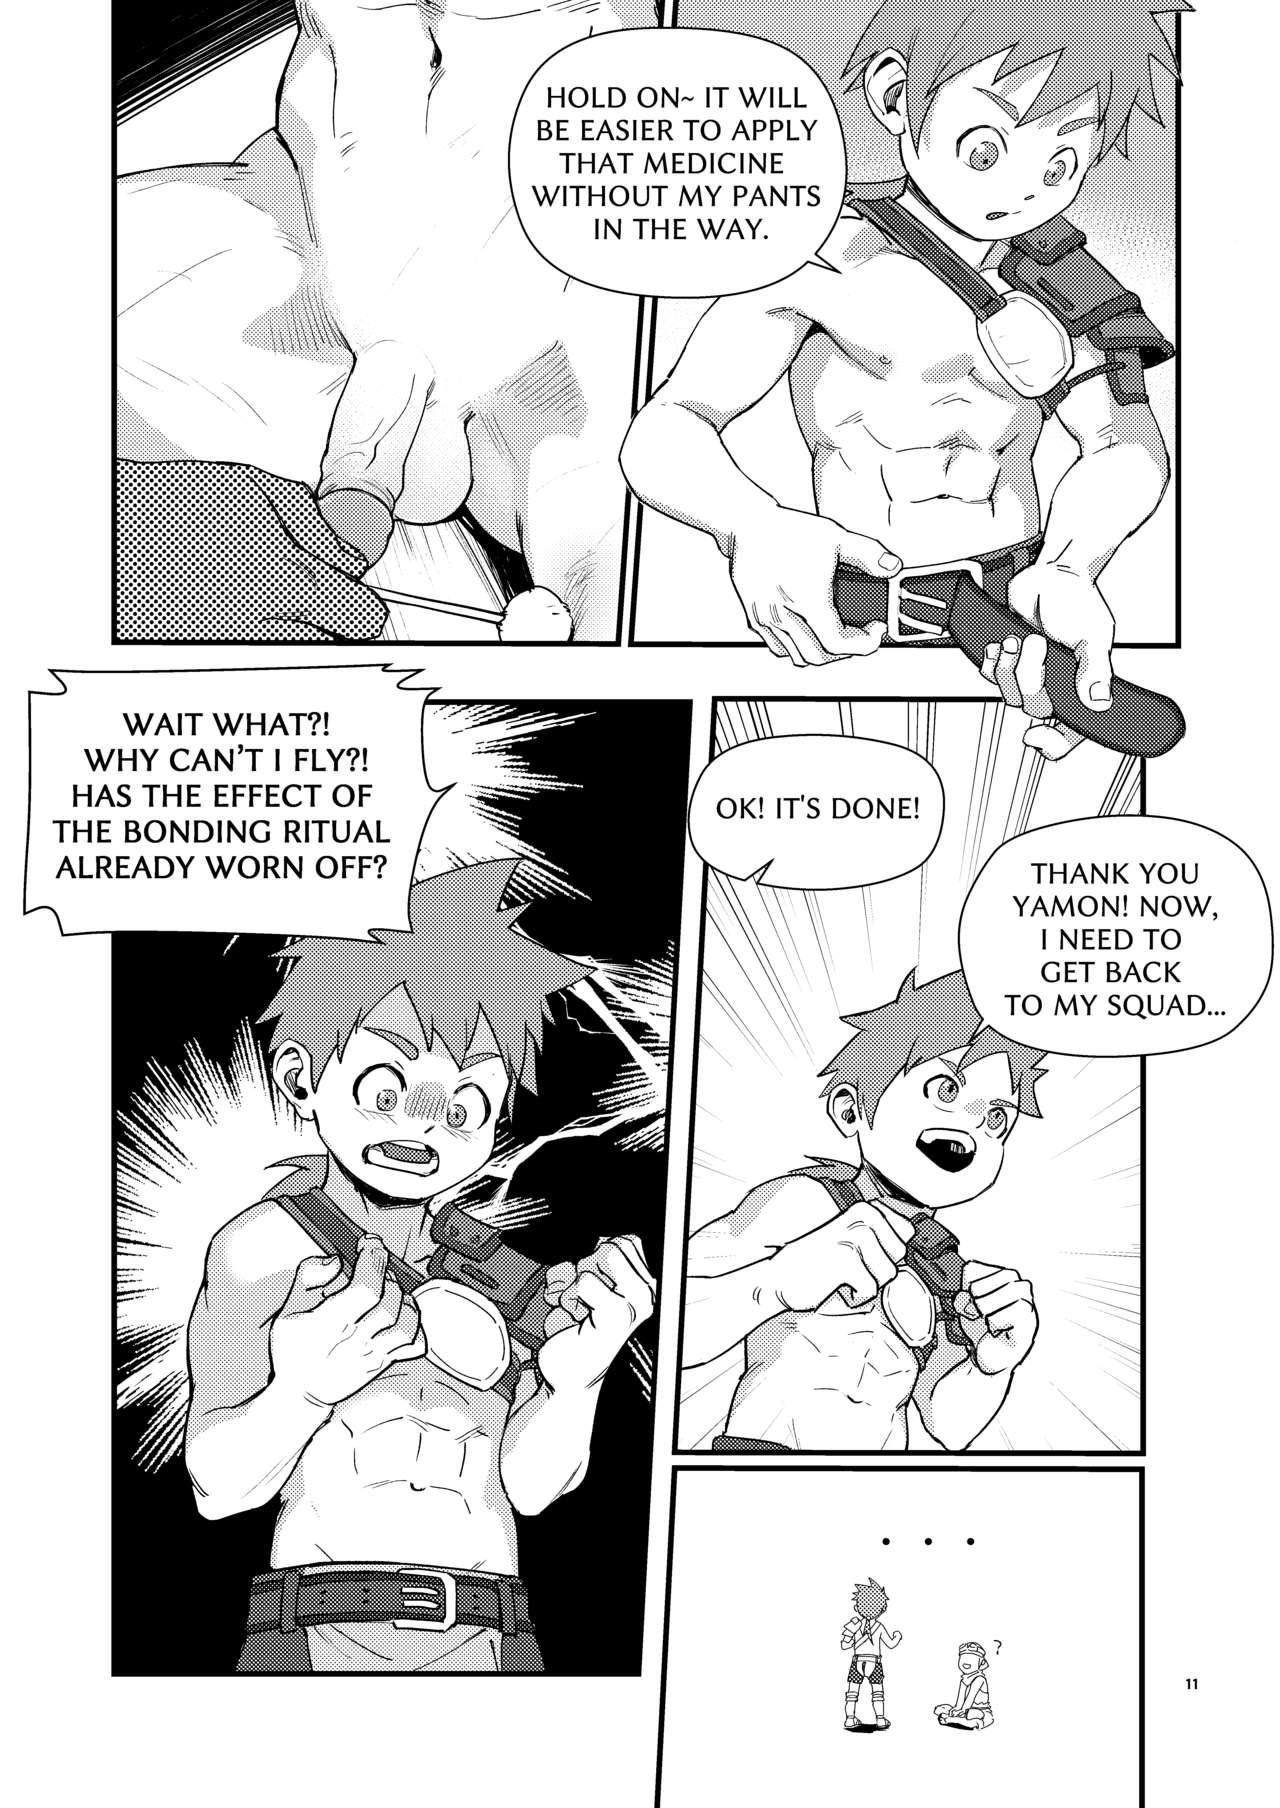 Tight Ass Above the Clouds - Original Orgame - Page 11